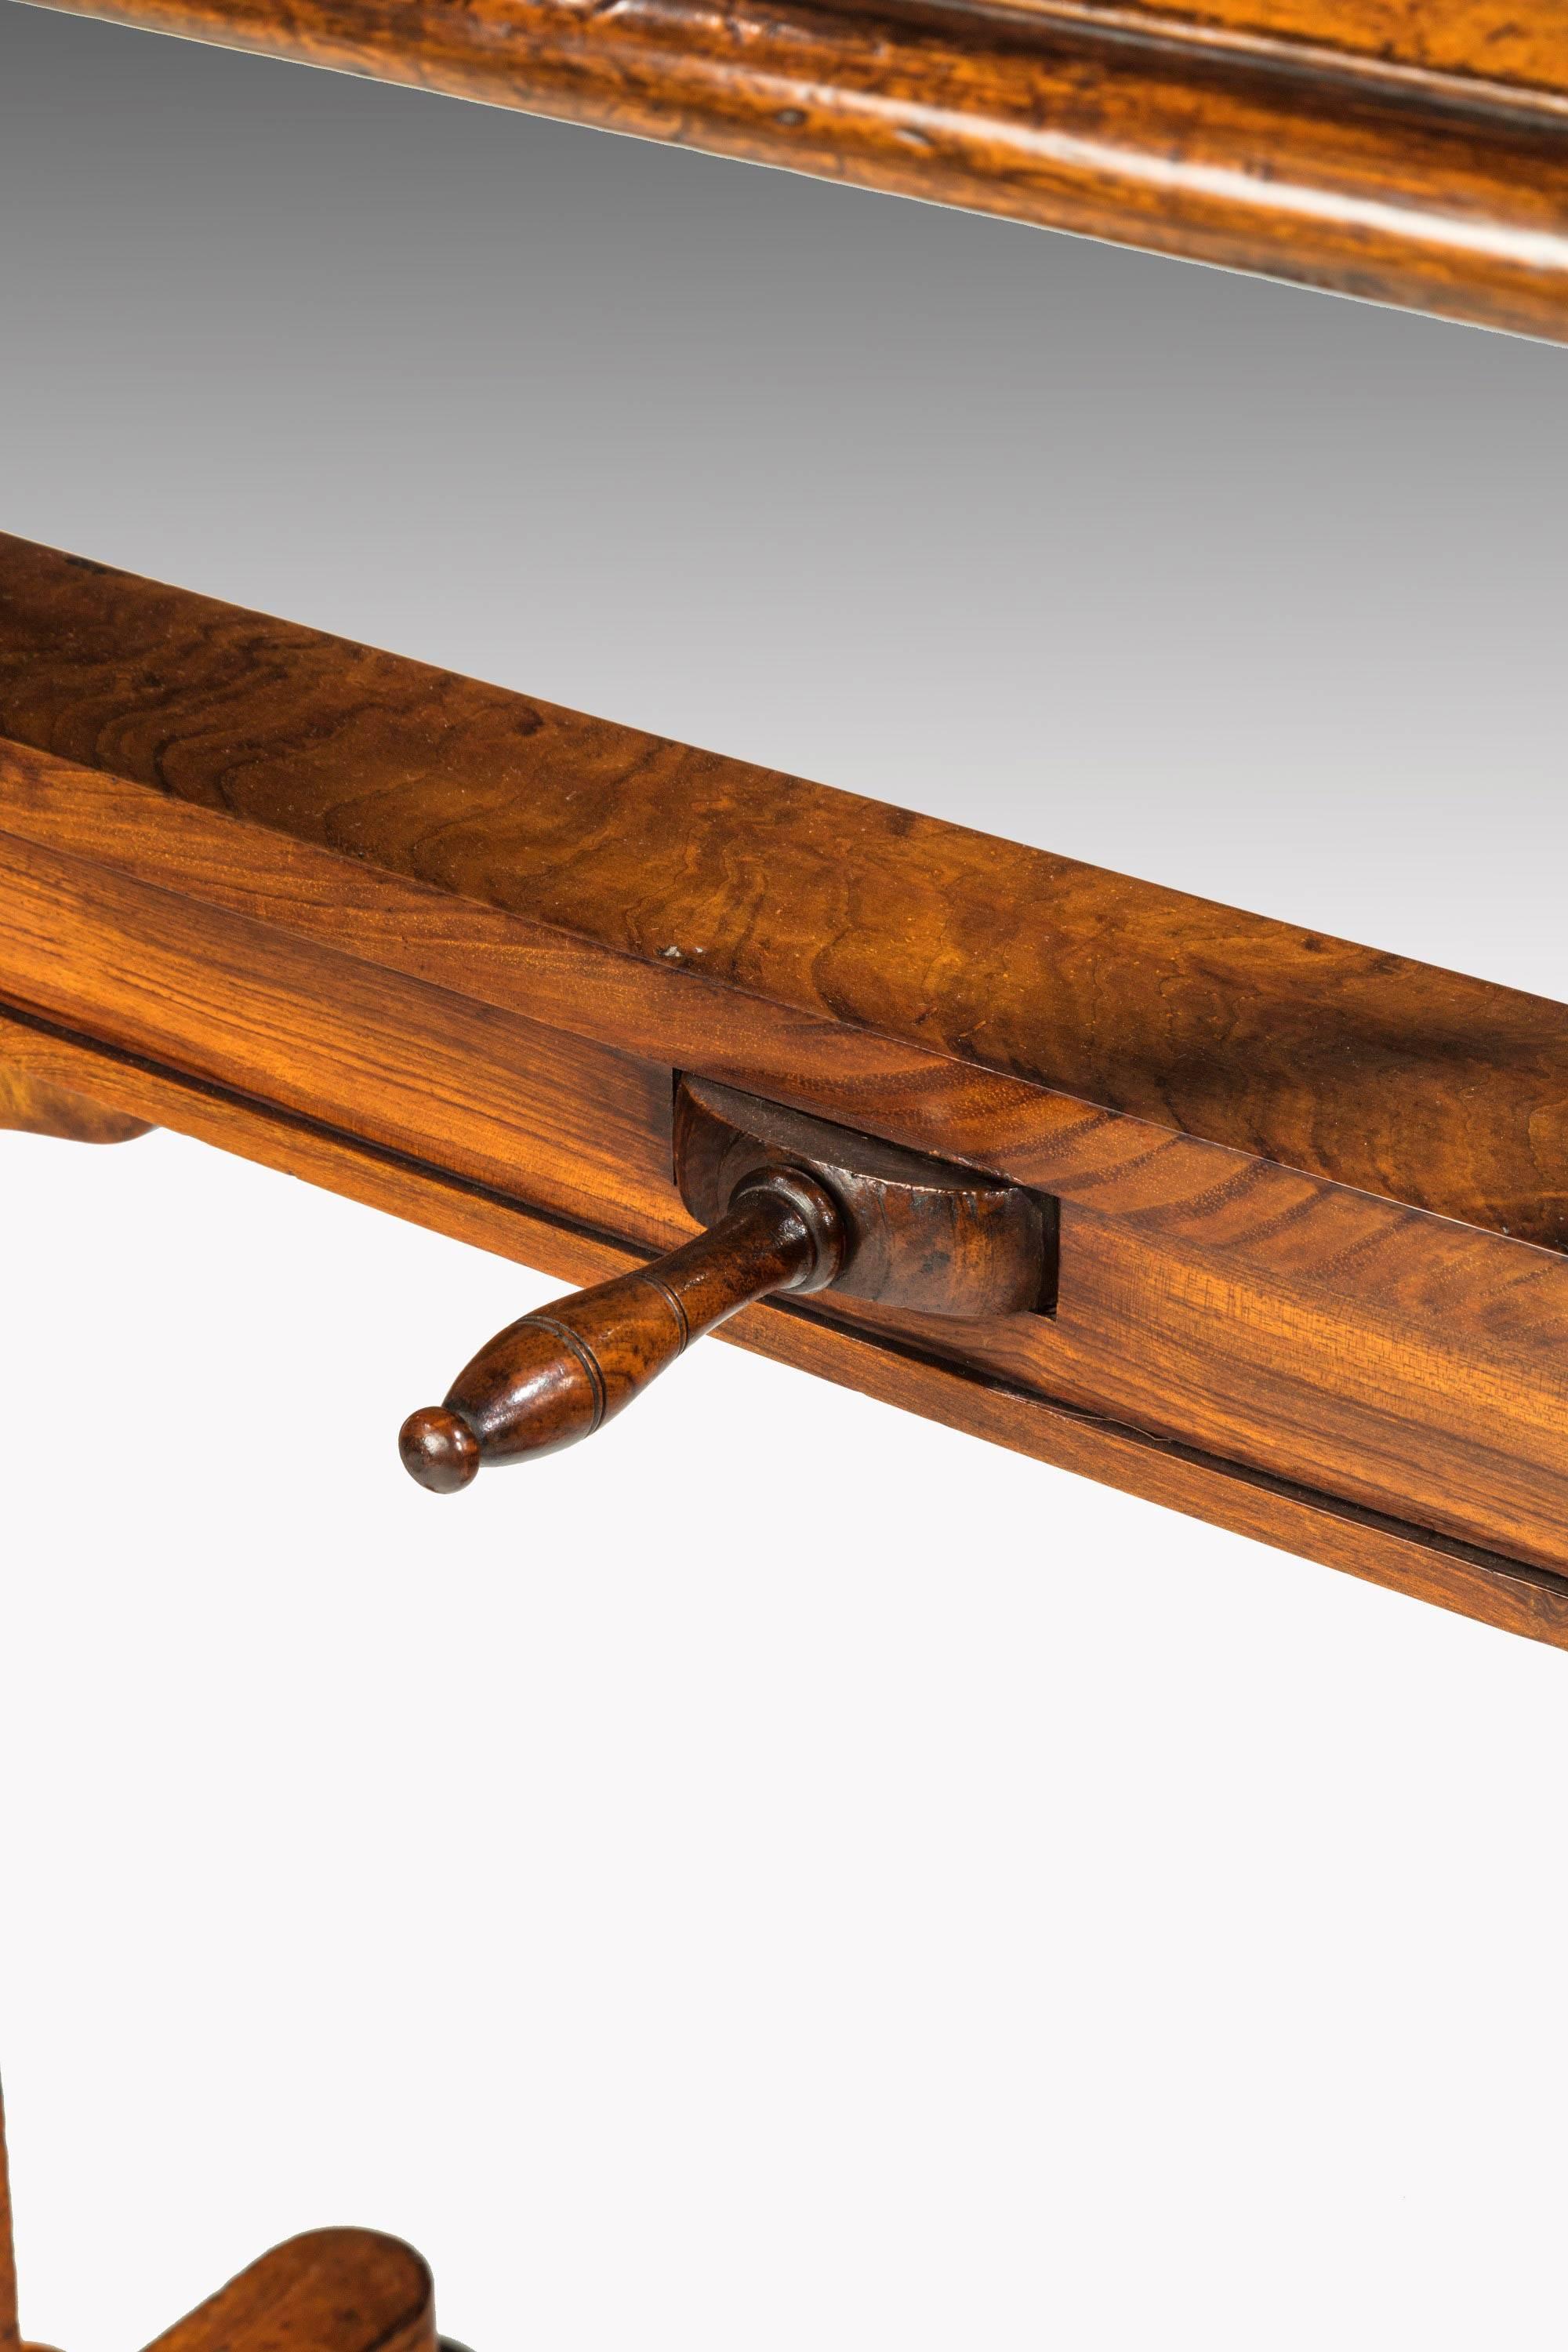 19th Century Regency Period Mahogany Writing Table with a Sliding Height Mechanism